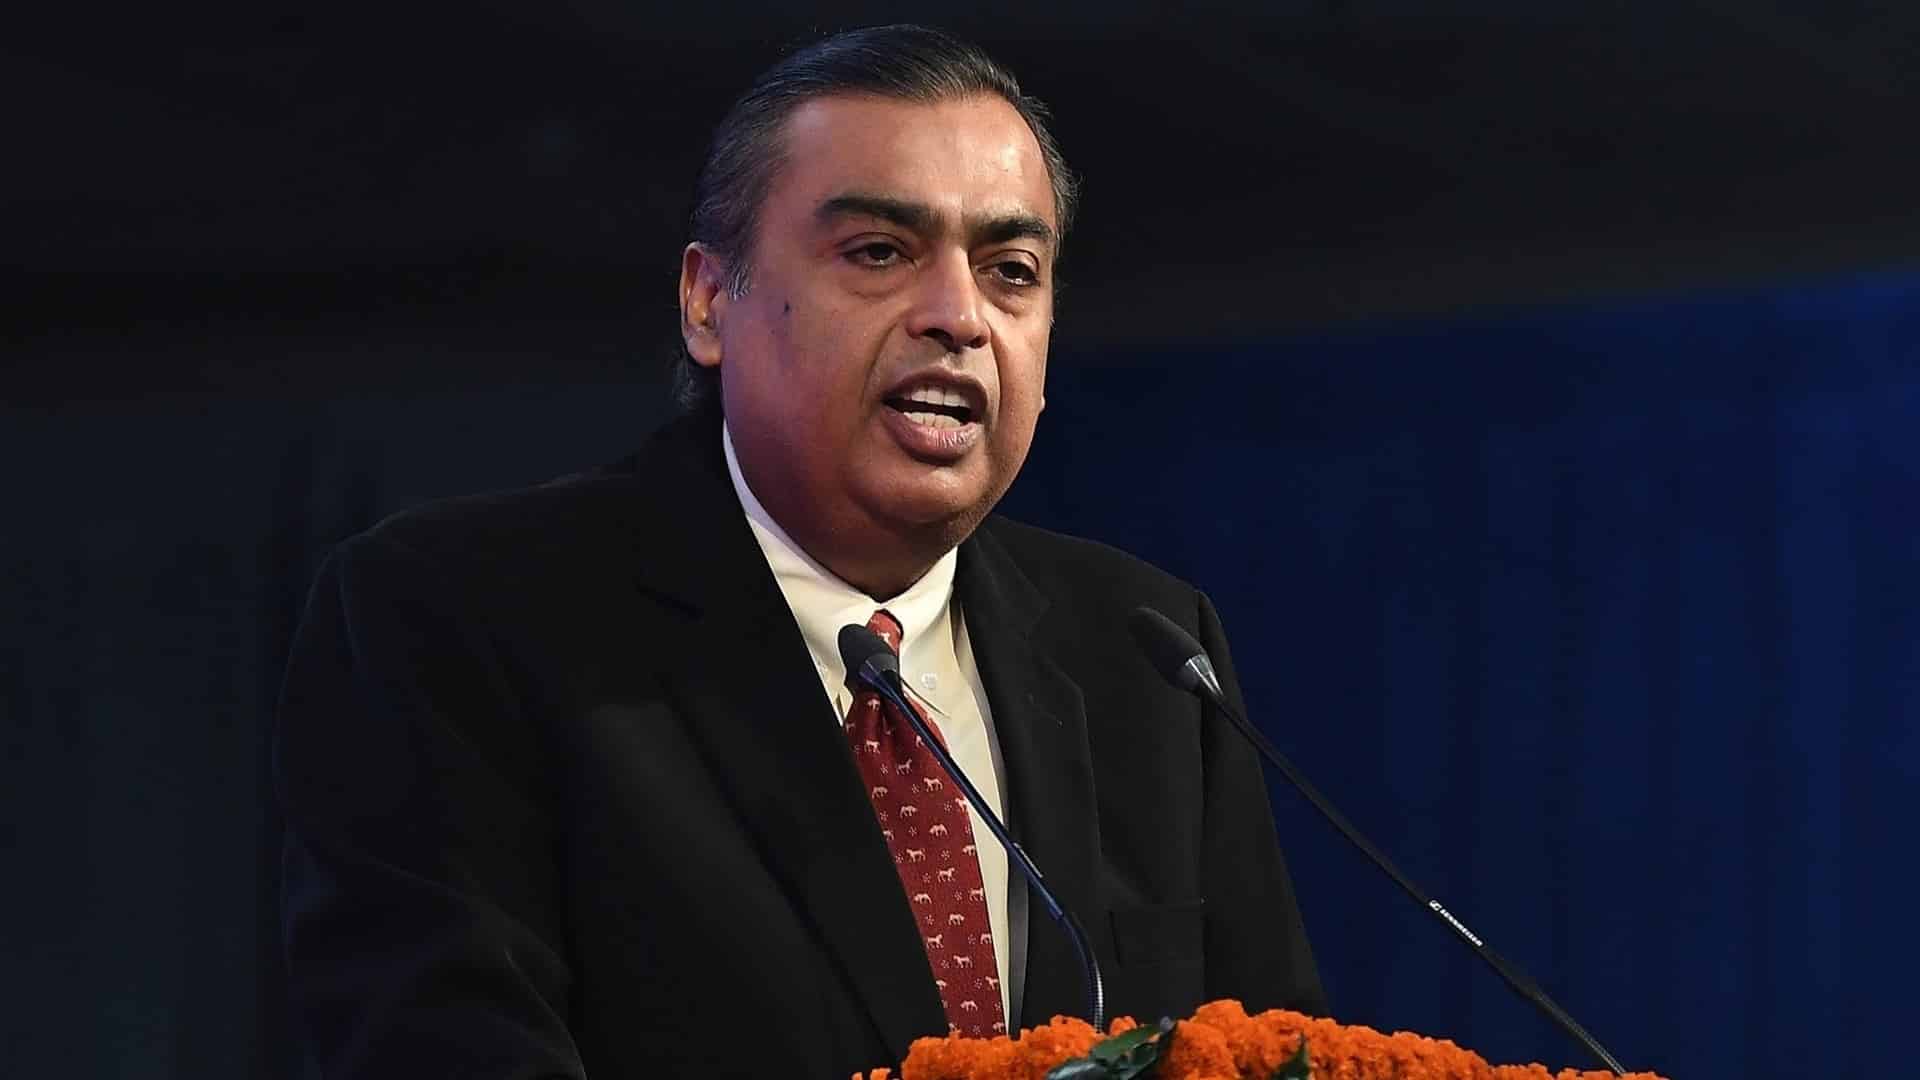 5G rollout should be India’s national priority, says Mukesh Ambani